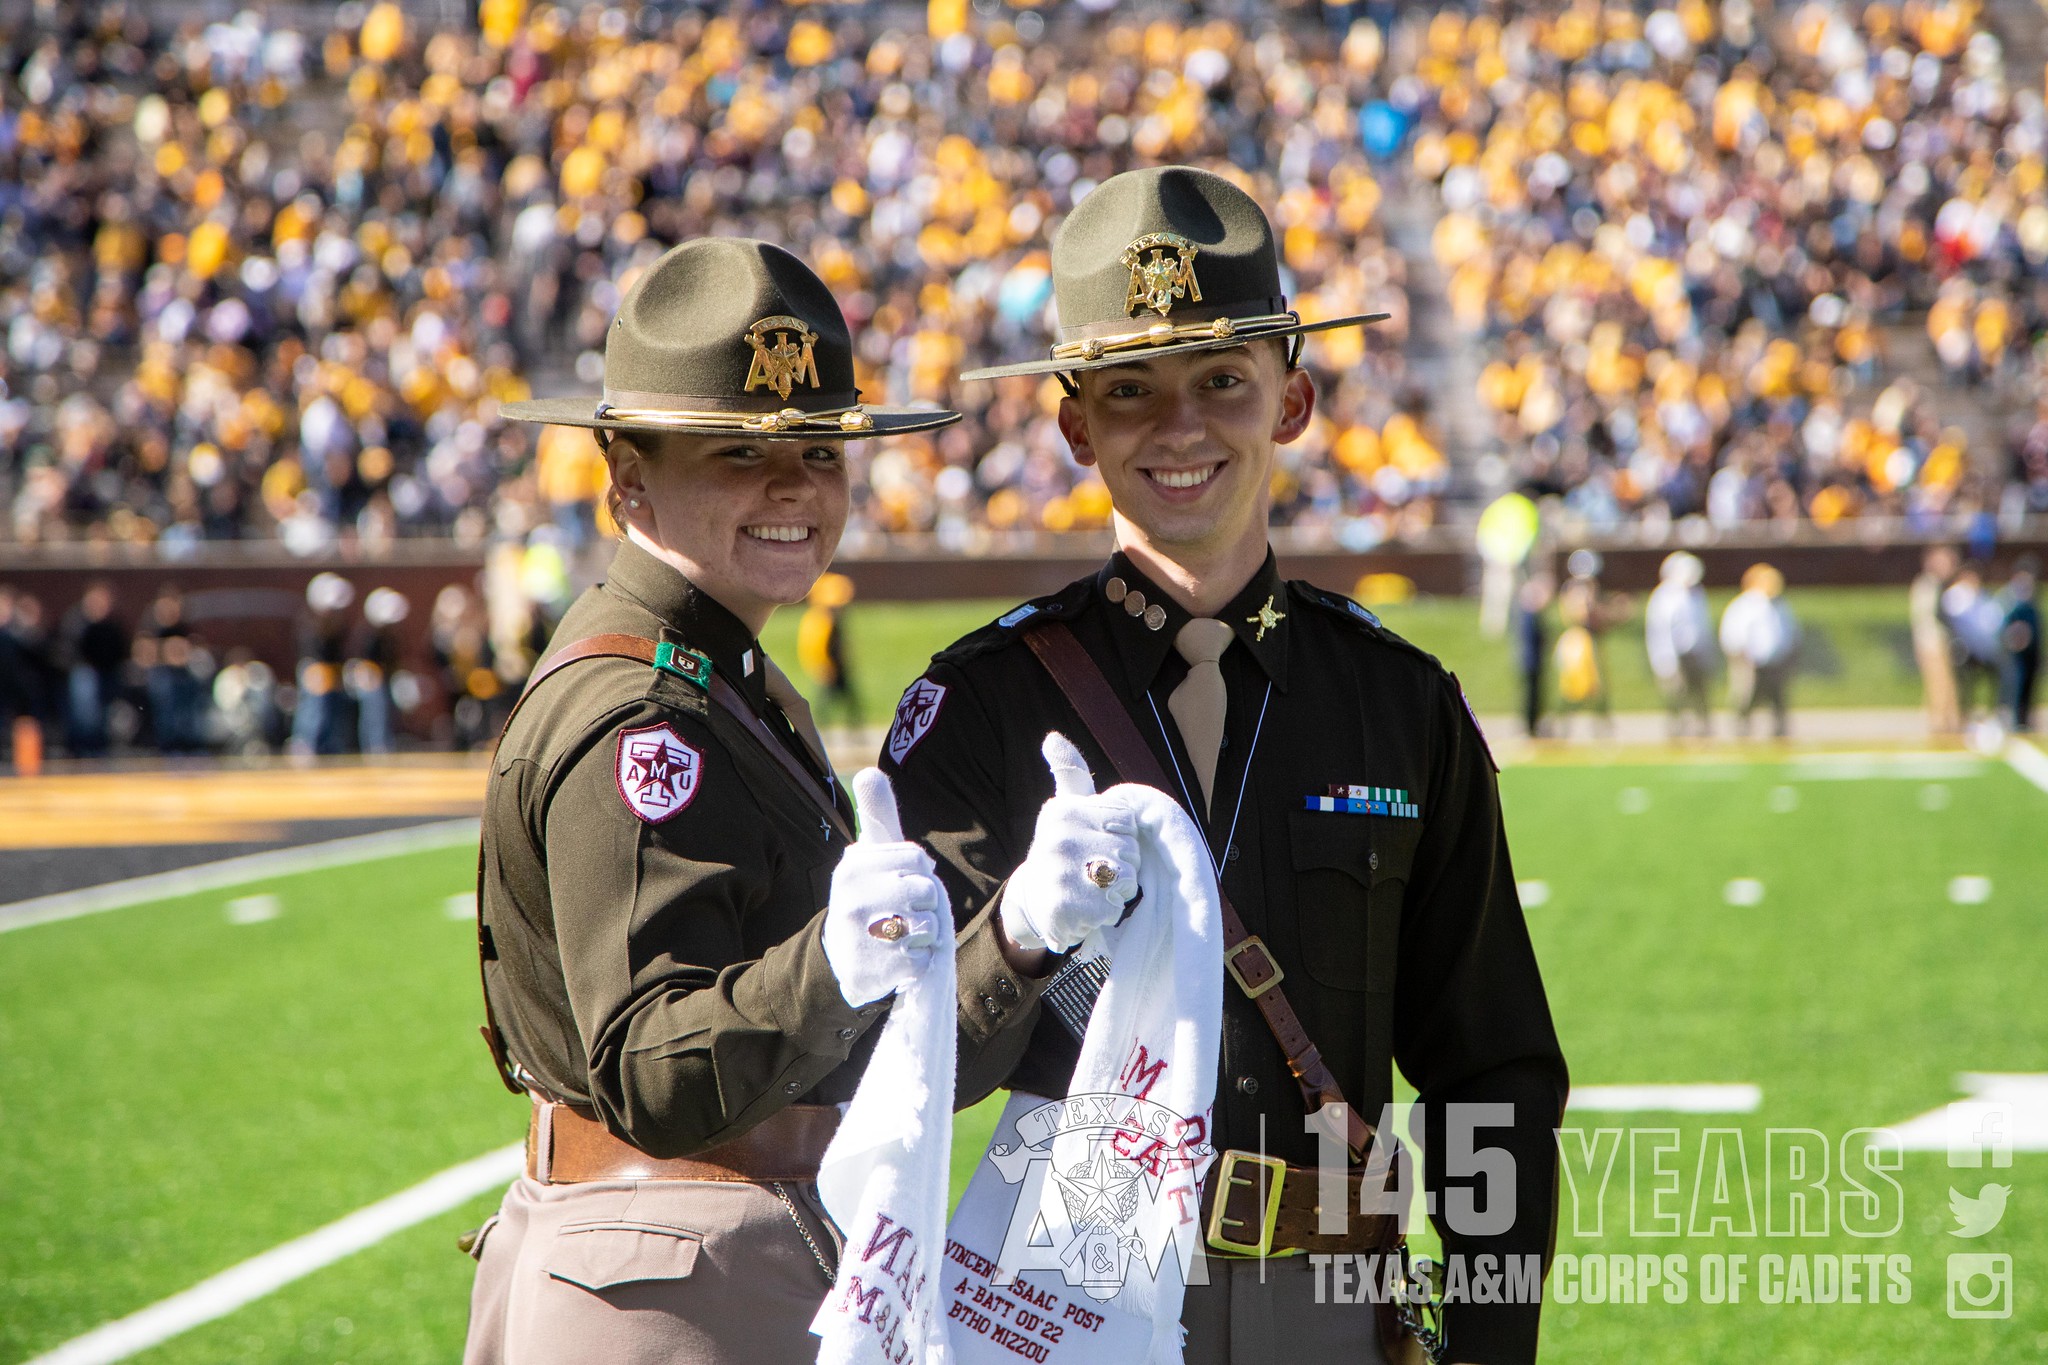 two cadets gig 'em at the football game against Missouri